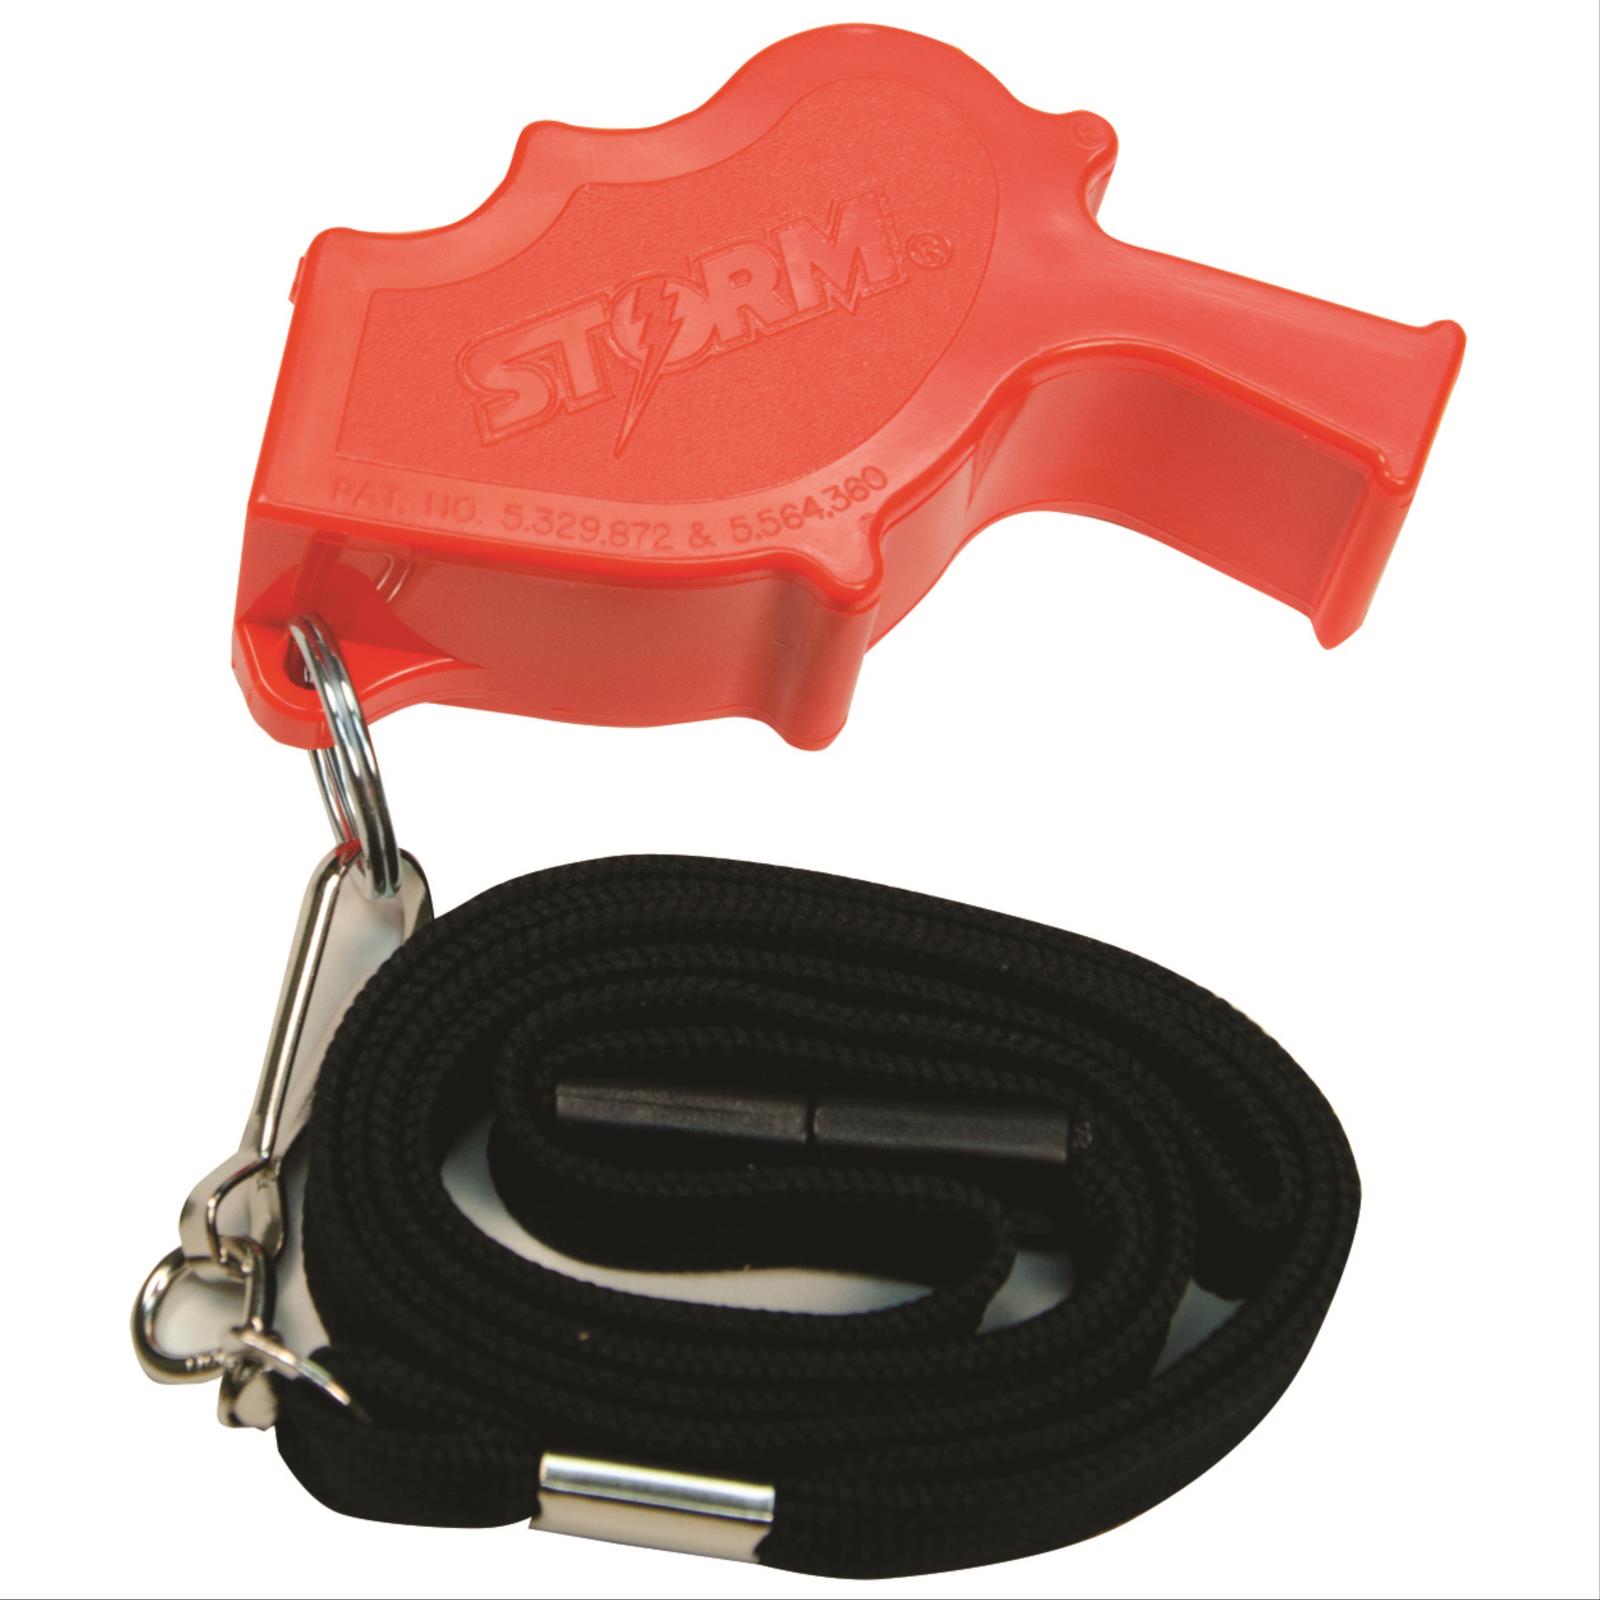 Storm™ Whistle